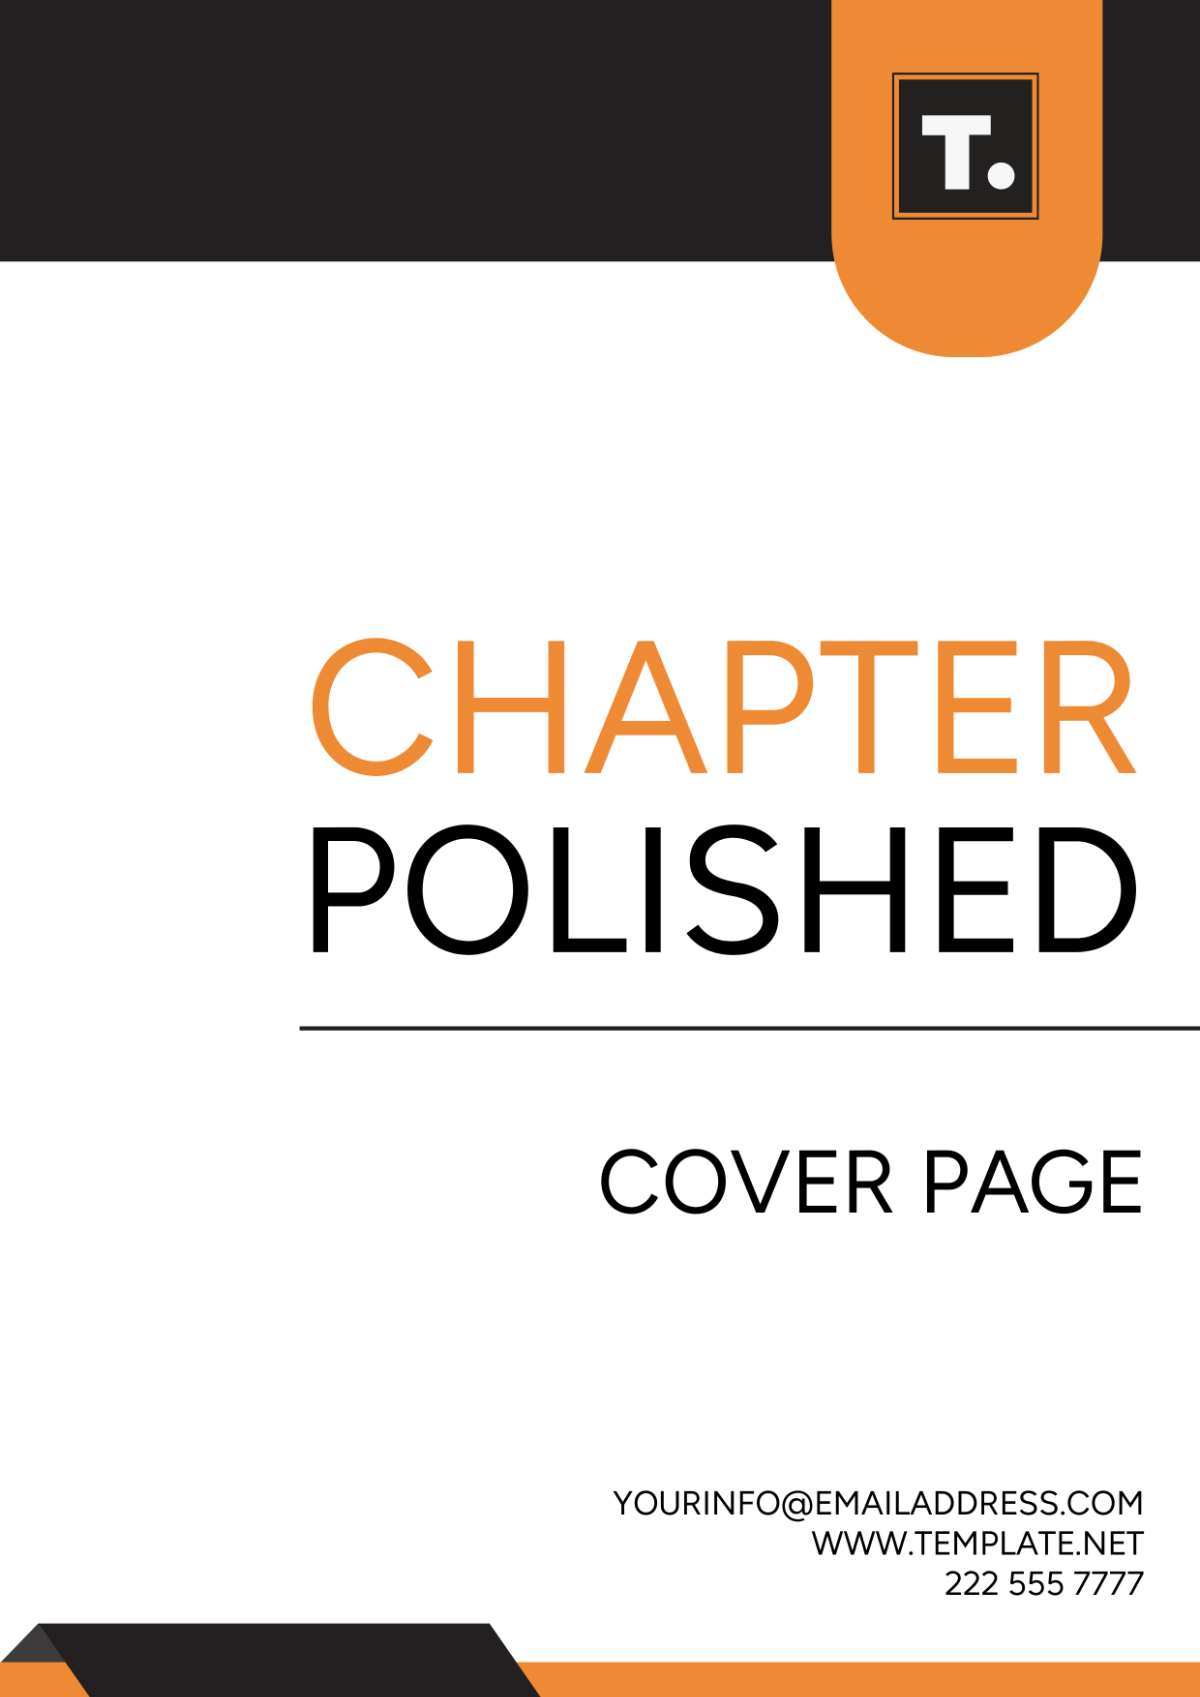 Free Chapter Polished Cover Page Template